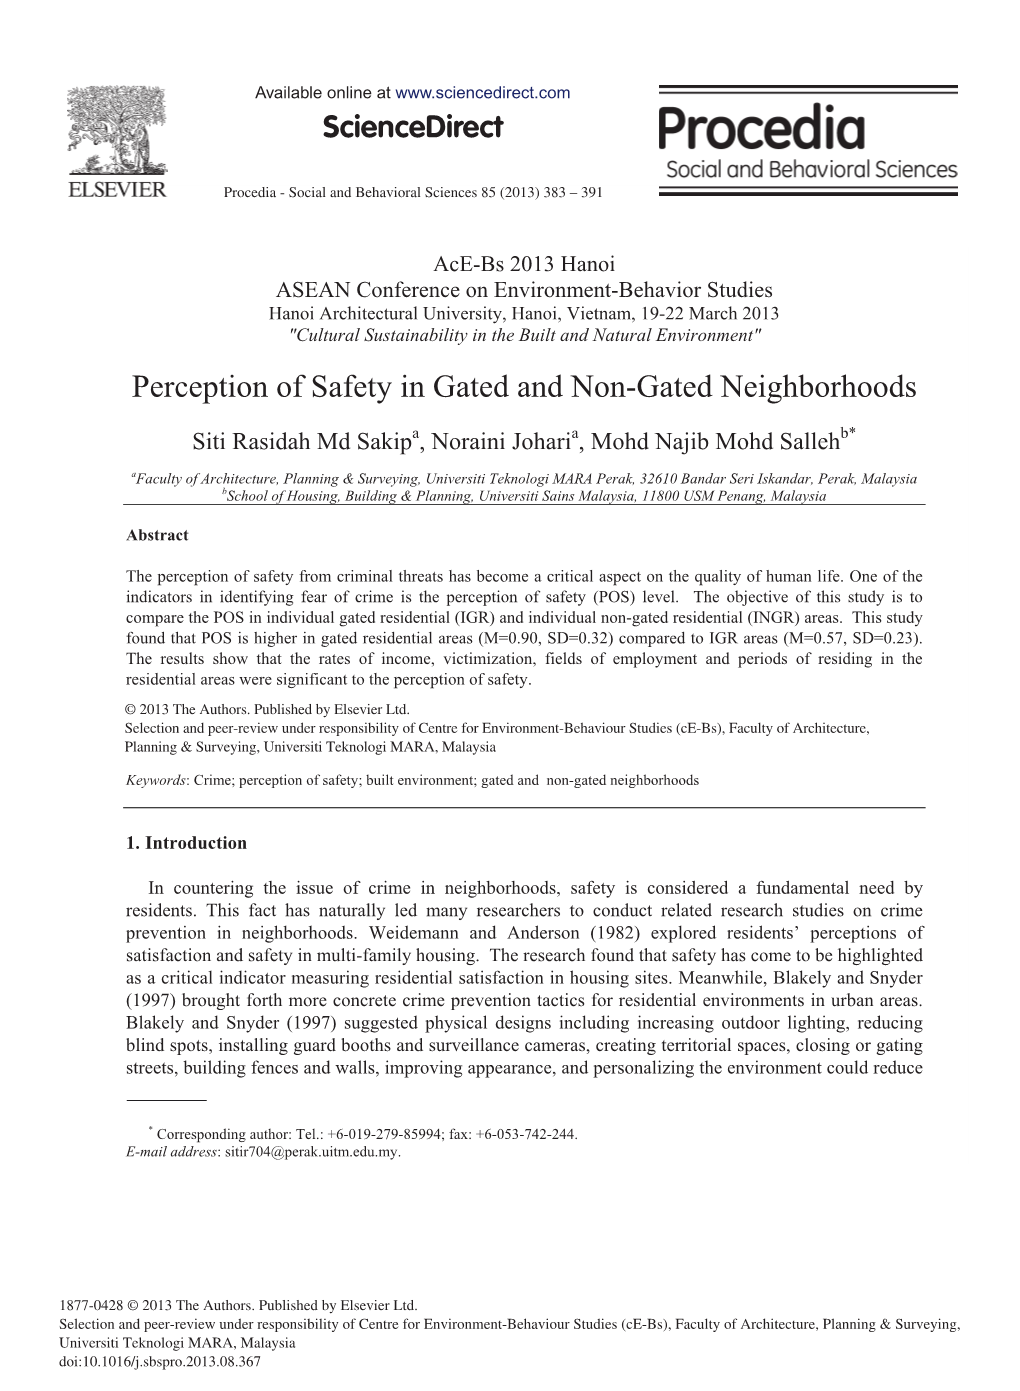 Perception of Safety in Gated and Non-Gated Neighborhoods